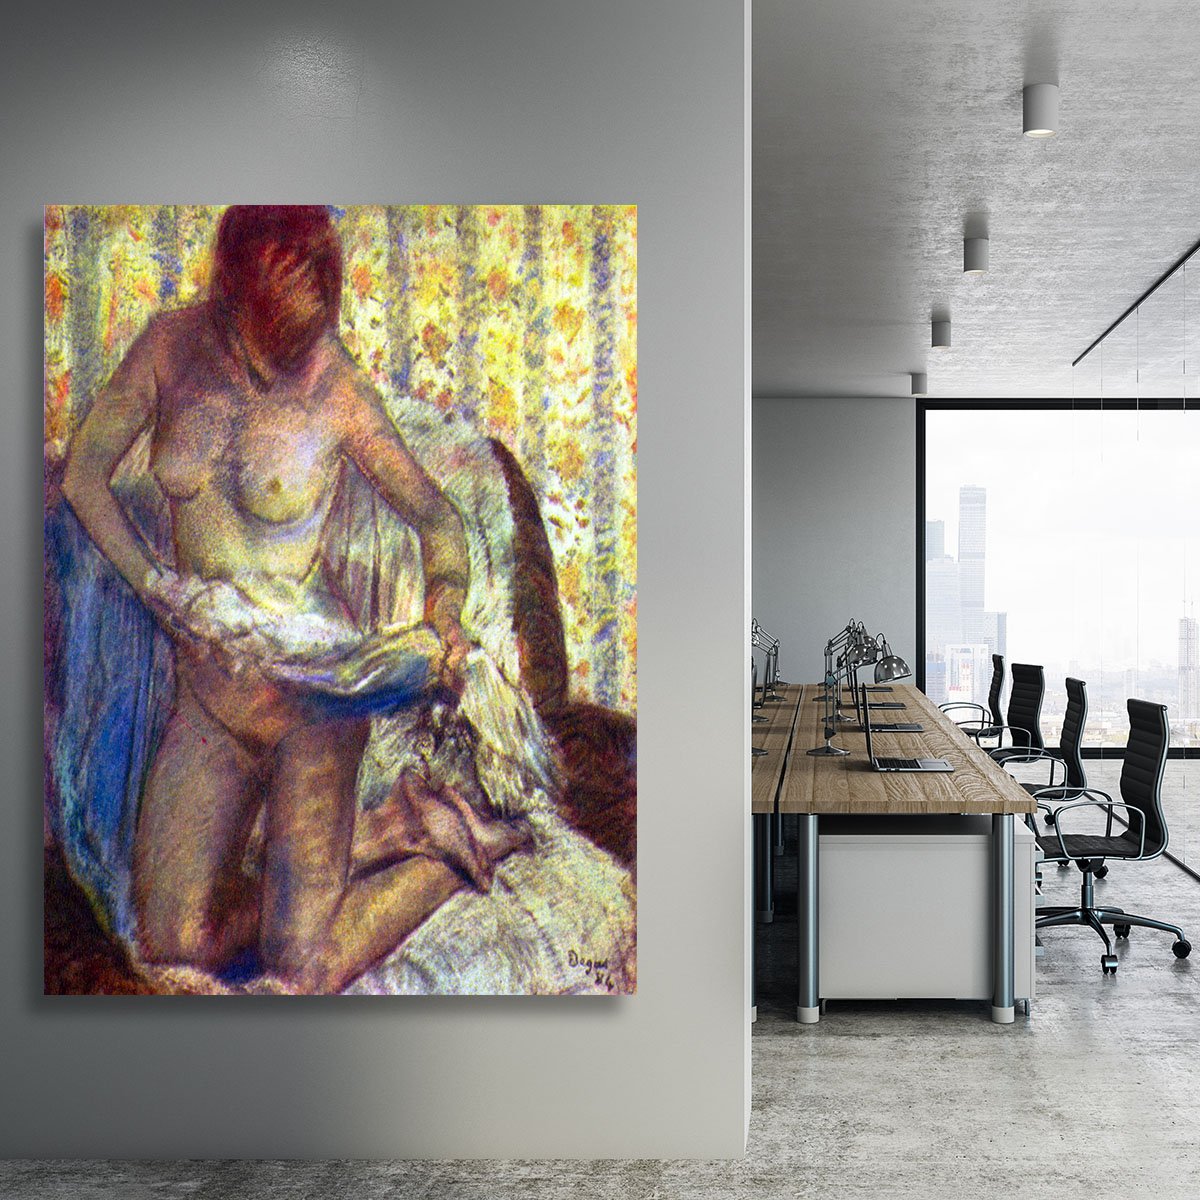 Nude Woman by Degas Canvas Print or Poster